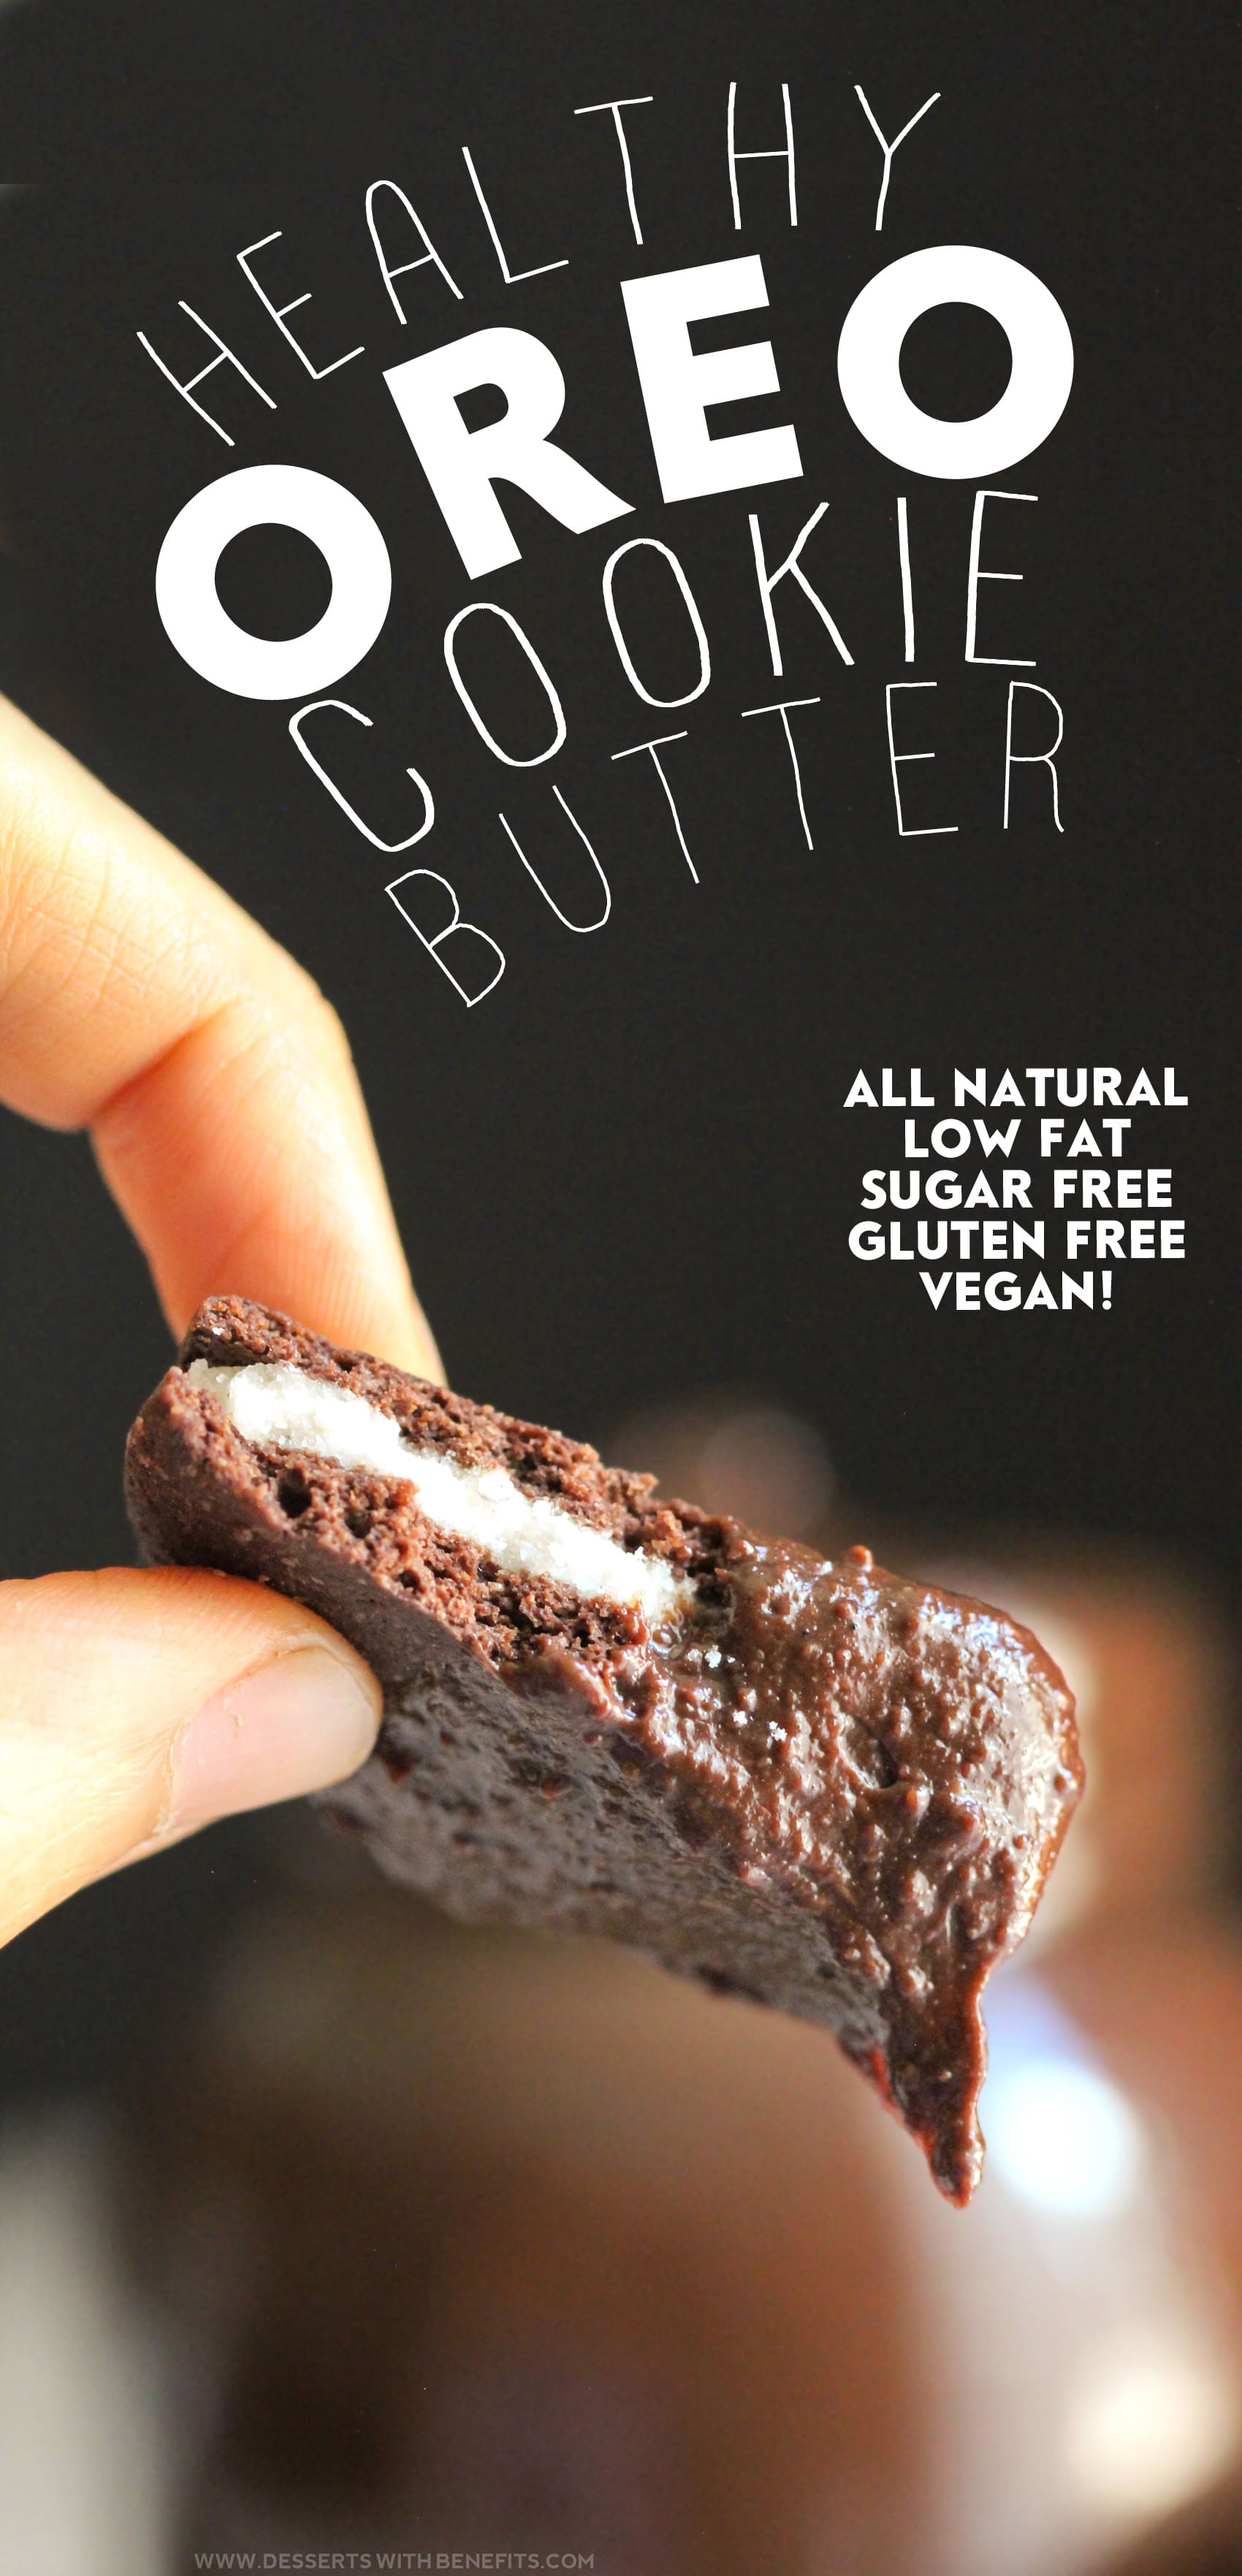 Healthy Oreo Cookie Butter recipe -- thick, rich, sweet, and chocolatey, it’ll beat peanut butter and almond butter ANY DAY! You’d never know it’s sugar free, low calorie, low fat, gluten free, dairy free, and vegan! Healthy Dessert Recipes at Desserts with Benefits